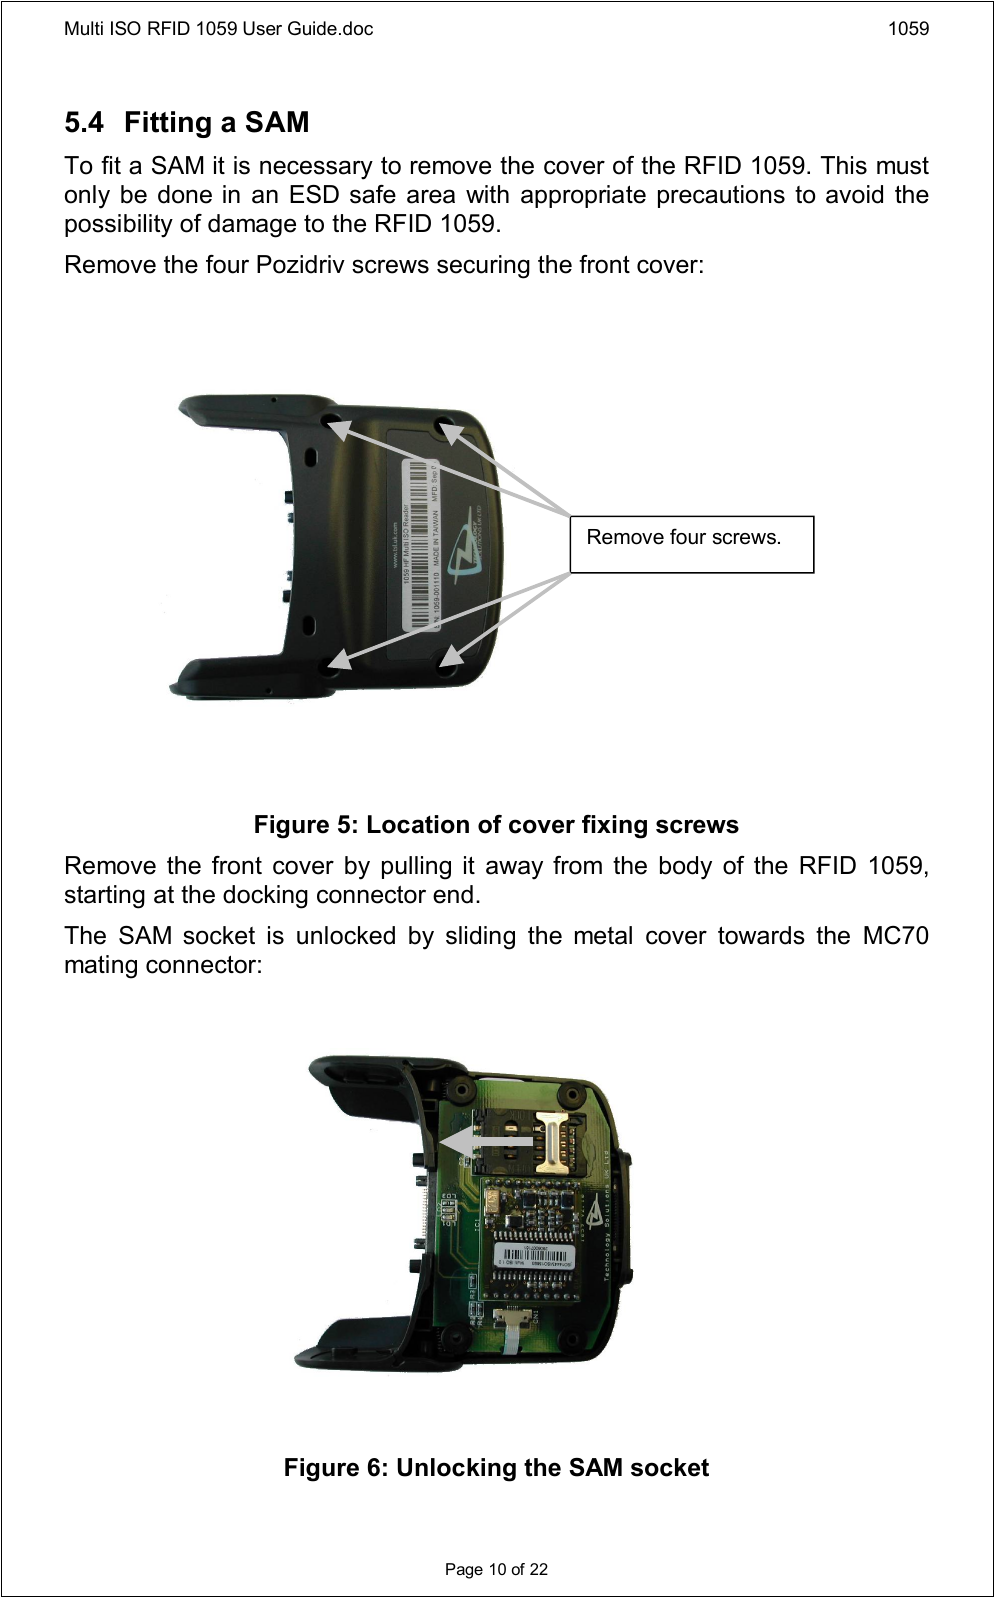 Multi ISO RFID 1059 User Guide.doc 1059Page 10 of 225.4 Fitting a SAMTo fit a SAM it is necessary to remove the cover of the RFID 1059. This must only be done in an ESD safe area with appropriate precautions to avoid the possibility of damage to the RFID 1059.Remove the four Pozidriv screws securing the front cover:Figure 5: Location of cover fixing screwsRemove the  front  cover  by pulling it  away from the body  of the RFID  1059, starting at the docking connector end.The  SAM  socket  is  unlocked  by  sliding  the  metal  cover  towards  the  MC70 mating connector:Figure 6: Unlocking the SAM socketRemove four screws.